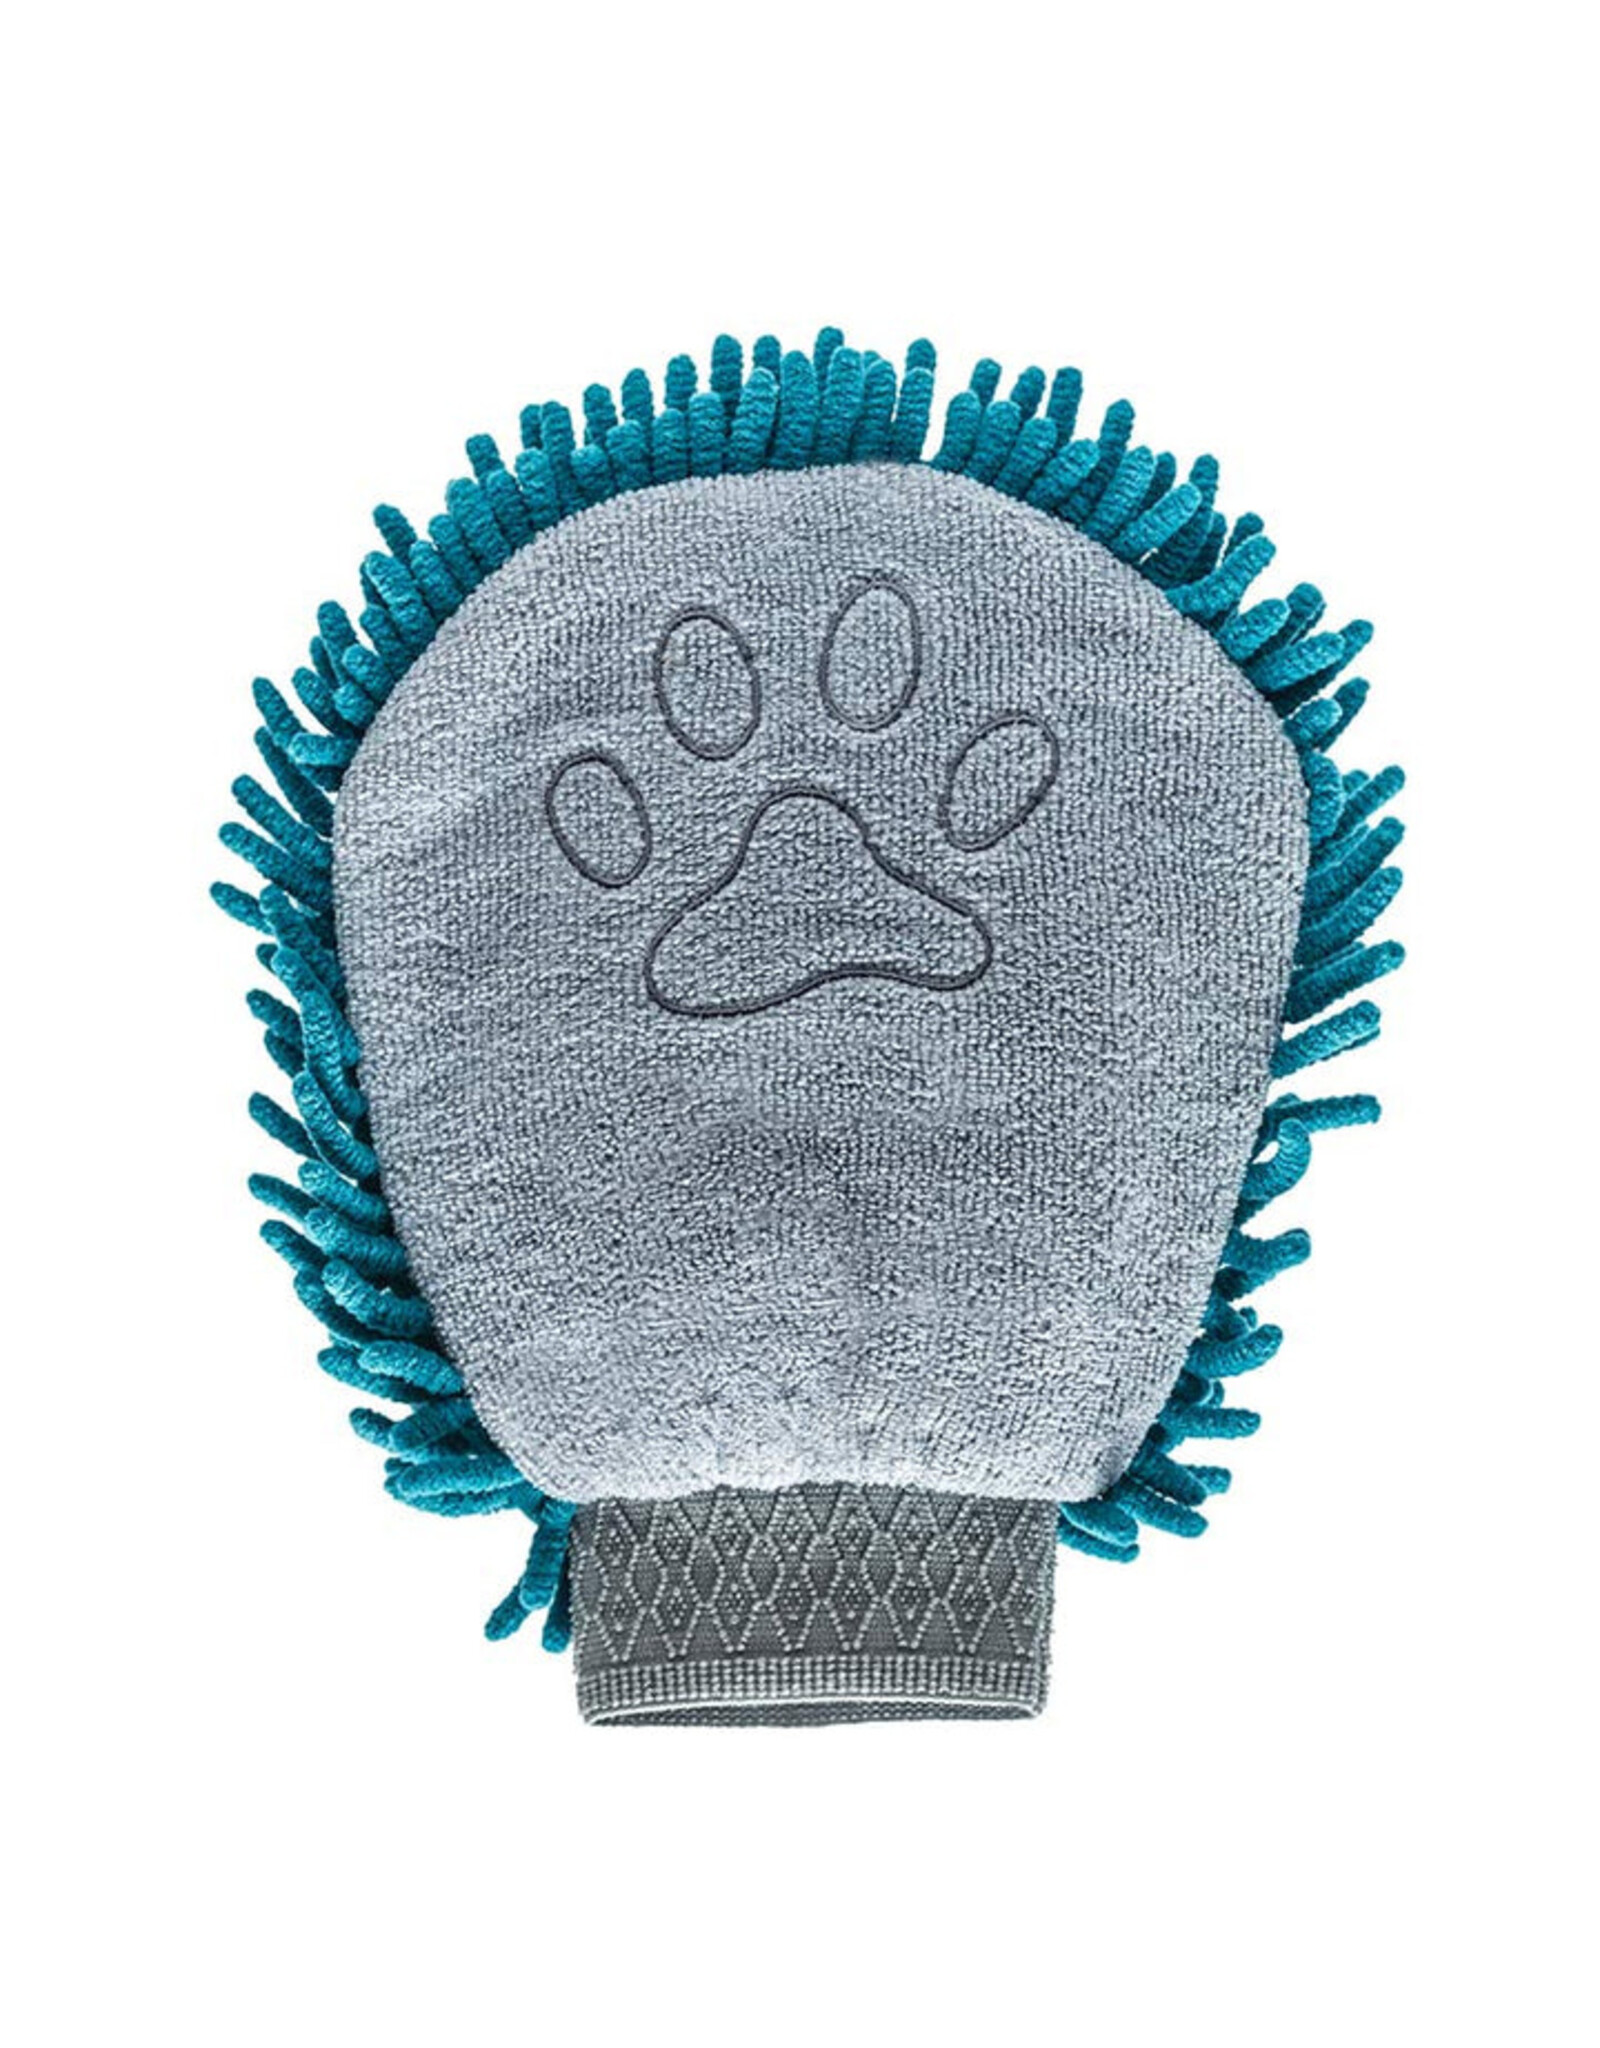 Messy Mutts Messy Mutts Chenille Grooming Mitt